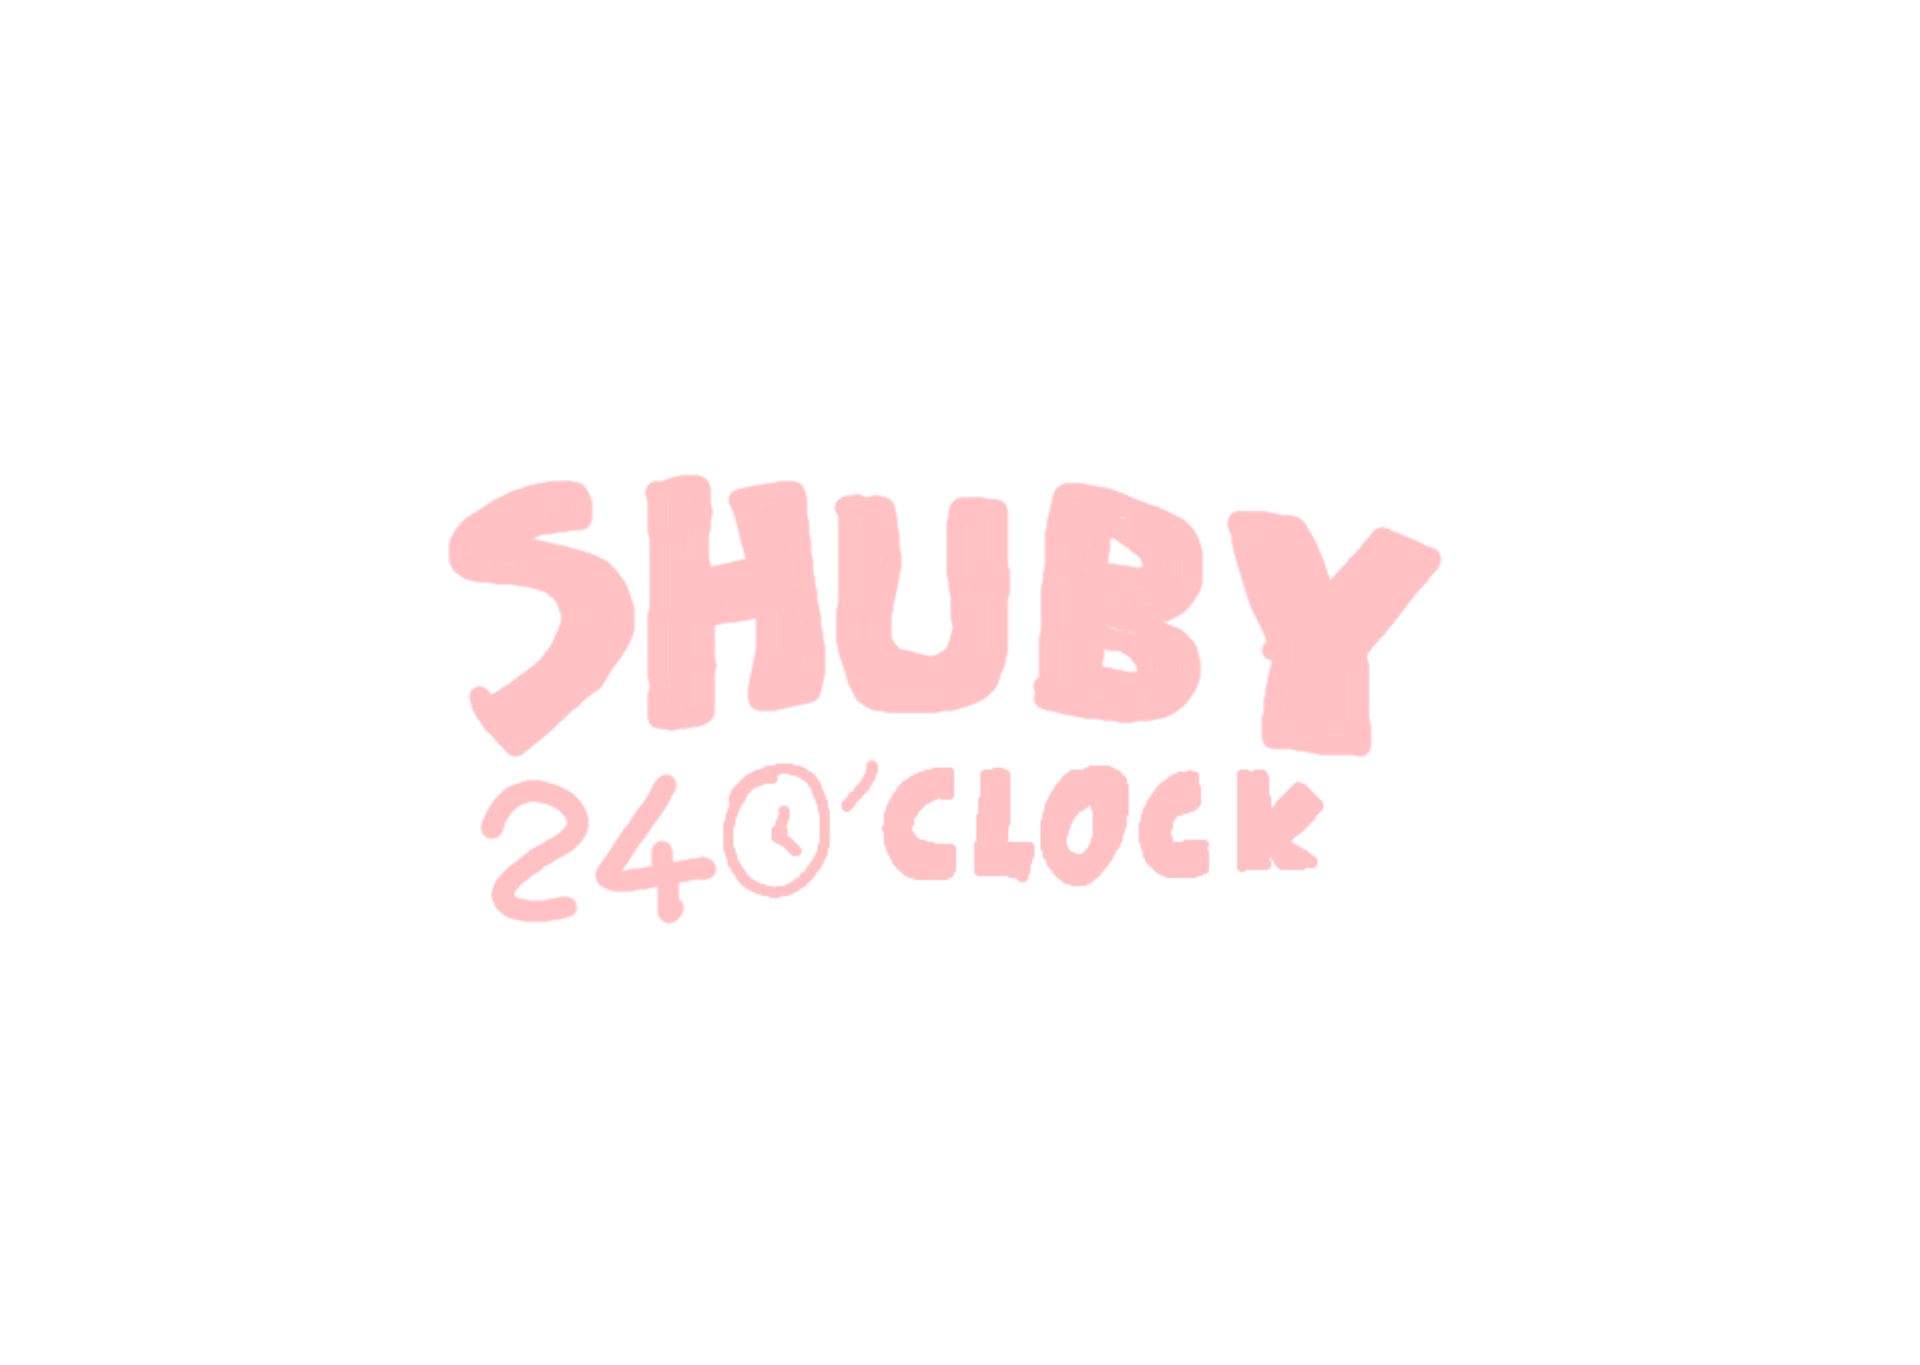 Shuby 24O'Clock To Show Your love